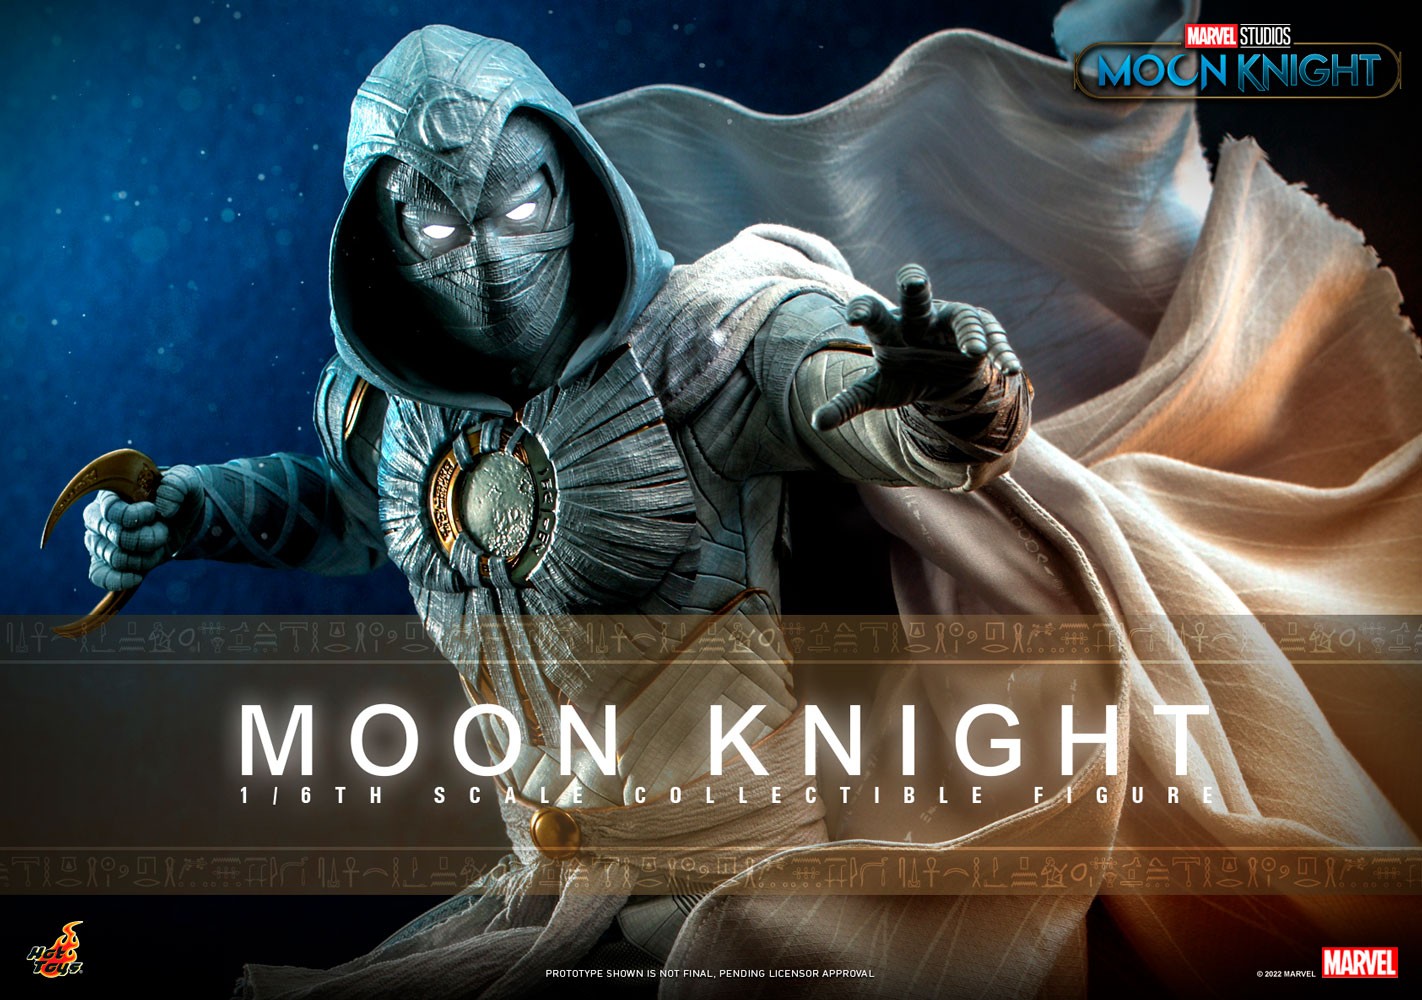 Moon Knight (Prototype Shown) View 1